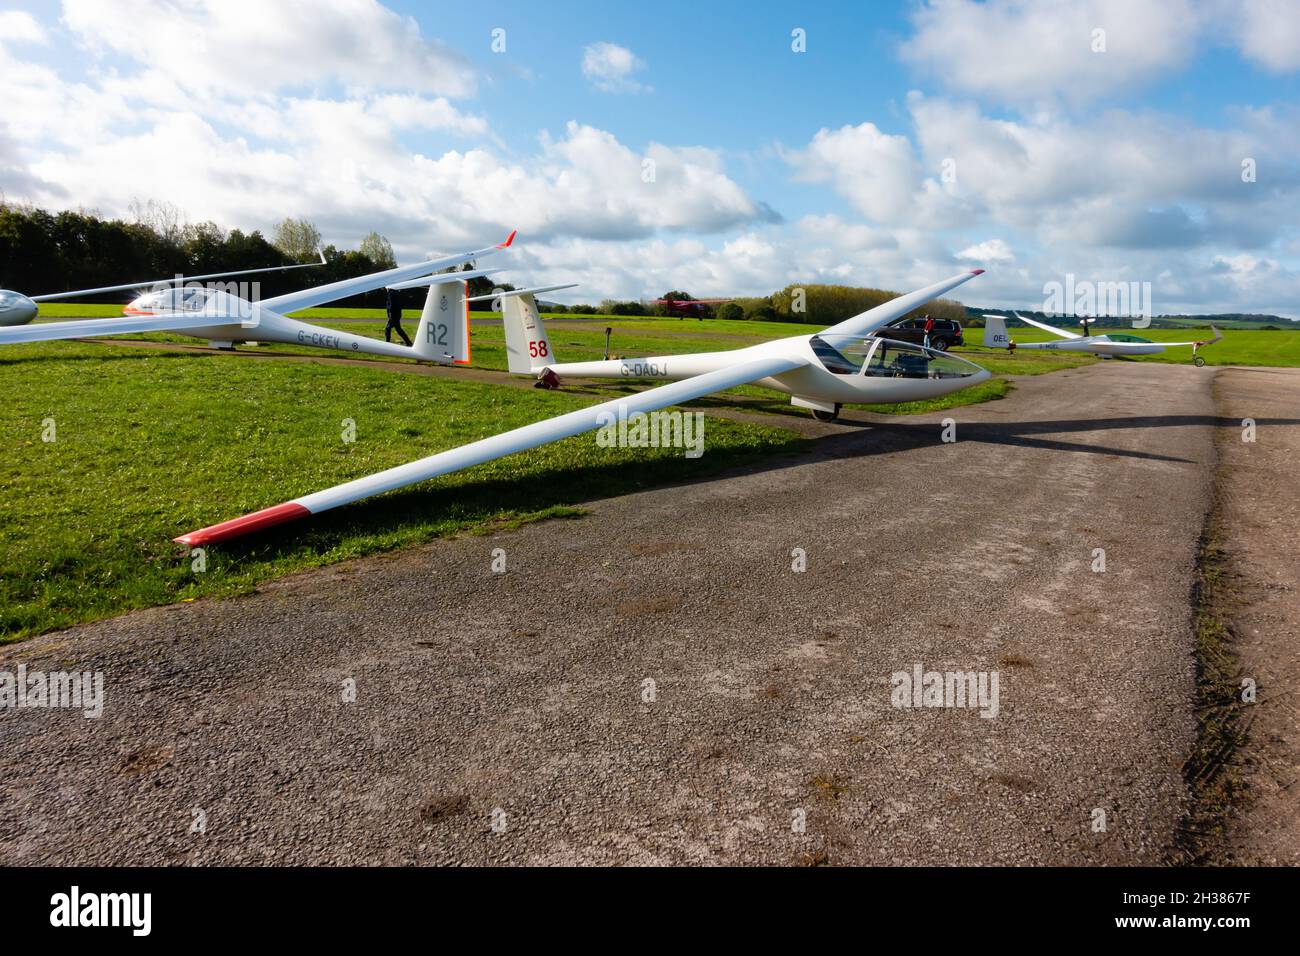 Glaser-Dirks DG200 glider, G-DADJ, parked at the launch point, Lleweni Parc gliding. Denbighshire, Wales. Behind are a Duo discus and Arcus M. Stock Photo